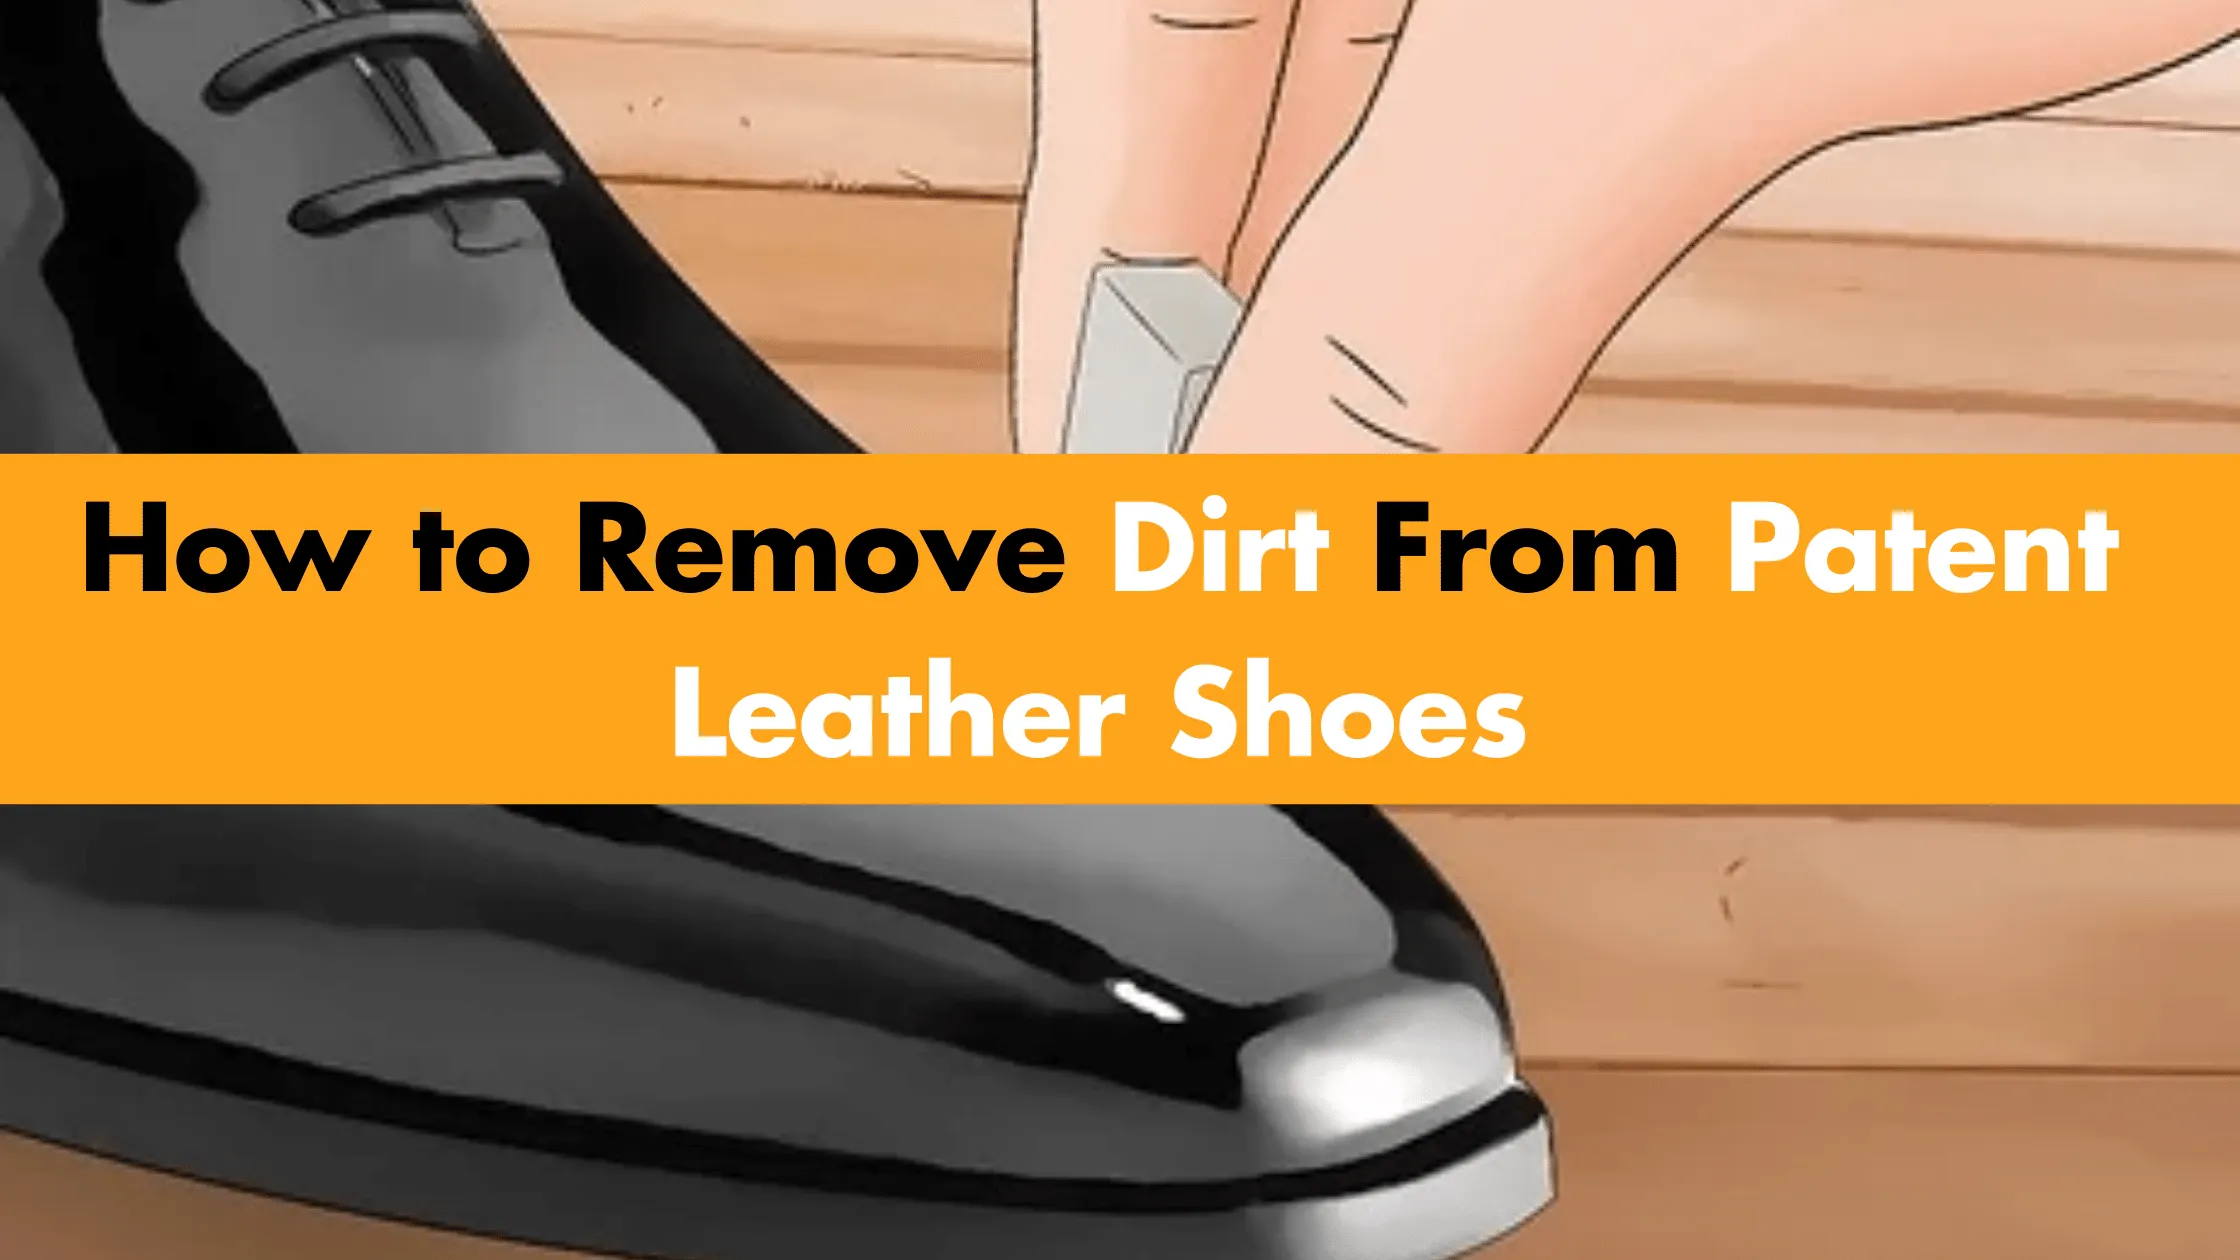 How to Remove Dirt from Patent Leather Shoes